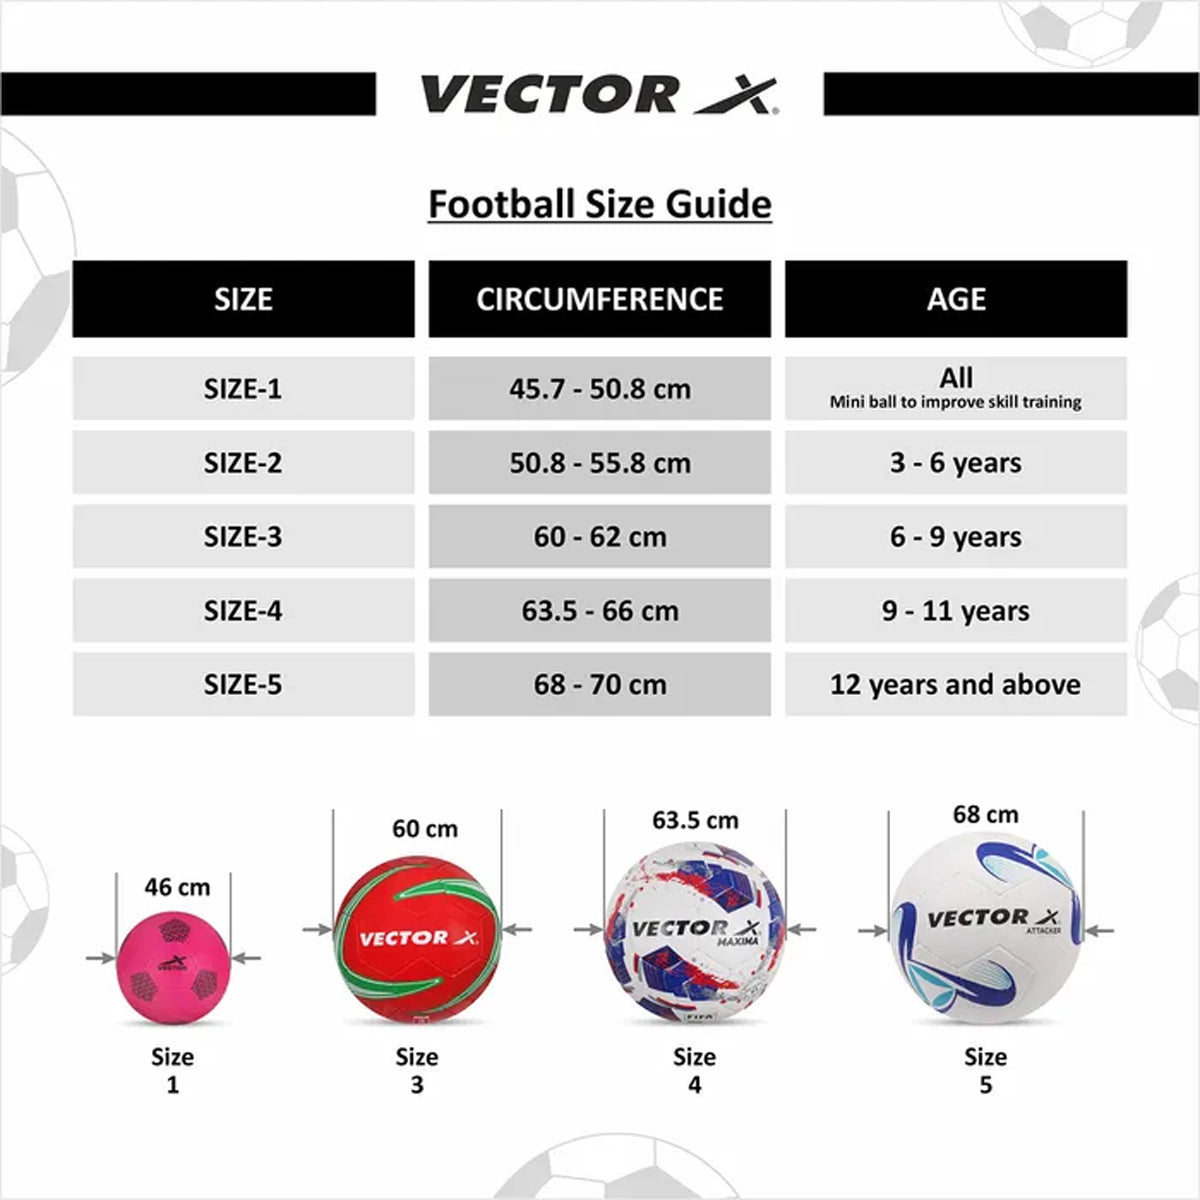 Vector X Synergy Thermo Fusion Football, Size 5 - Best Price online Prokicksports.com